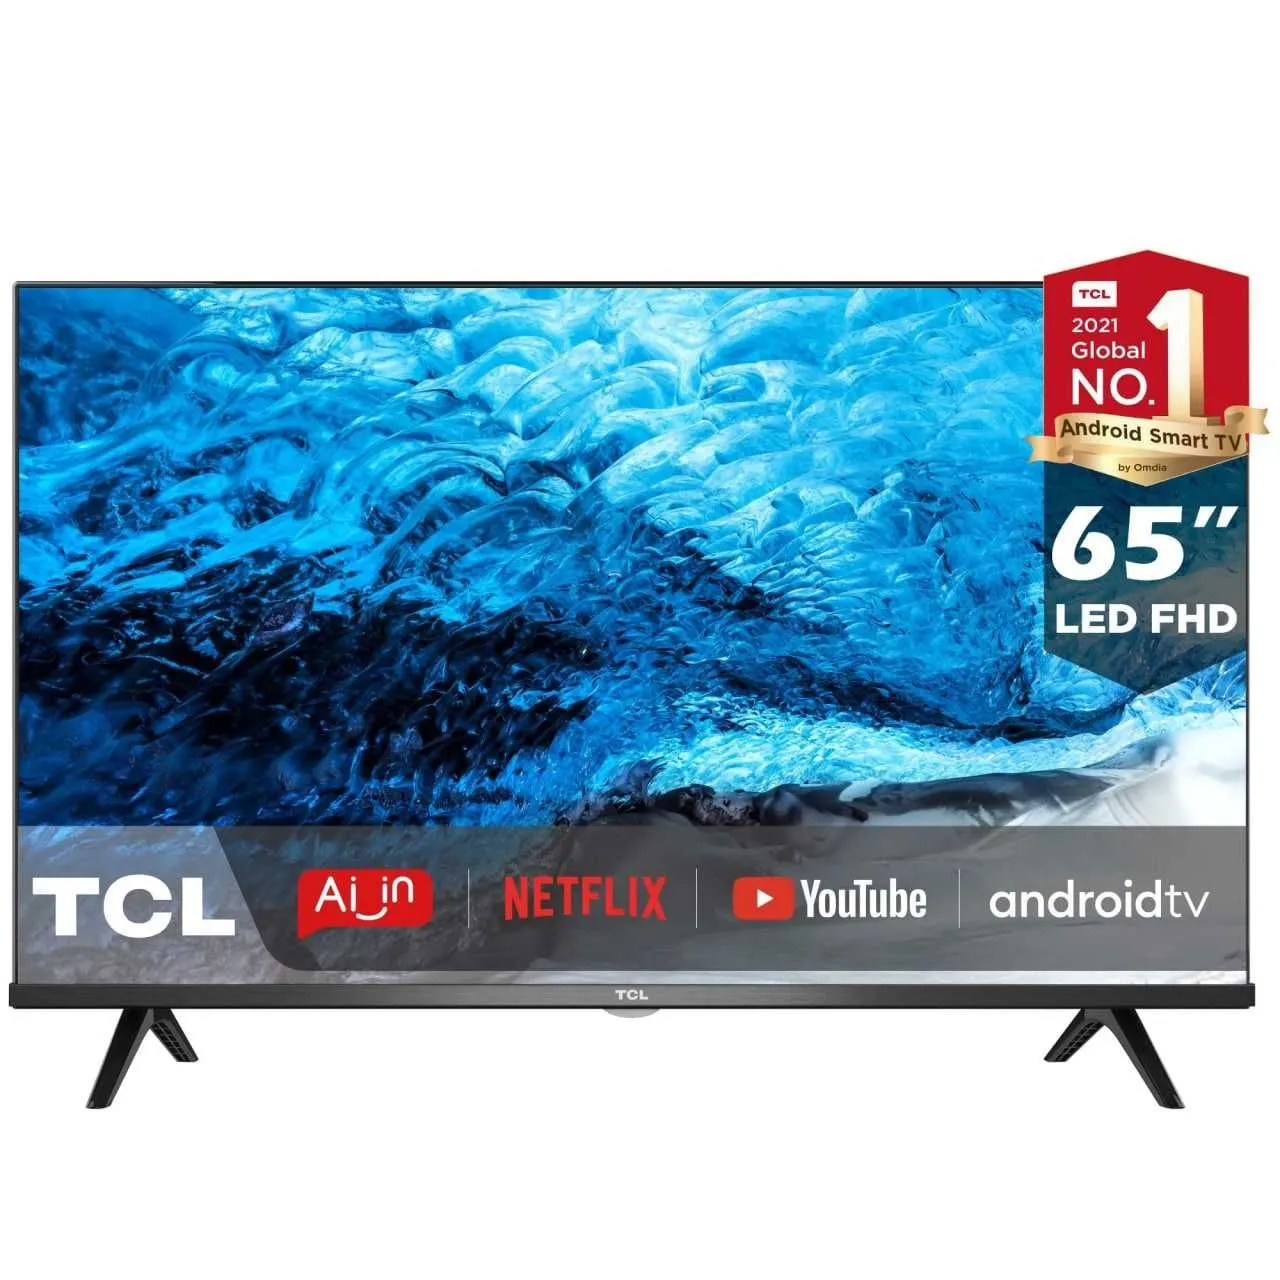 Телевизор TCL 65" 4K LCD Smart TV Android#3